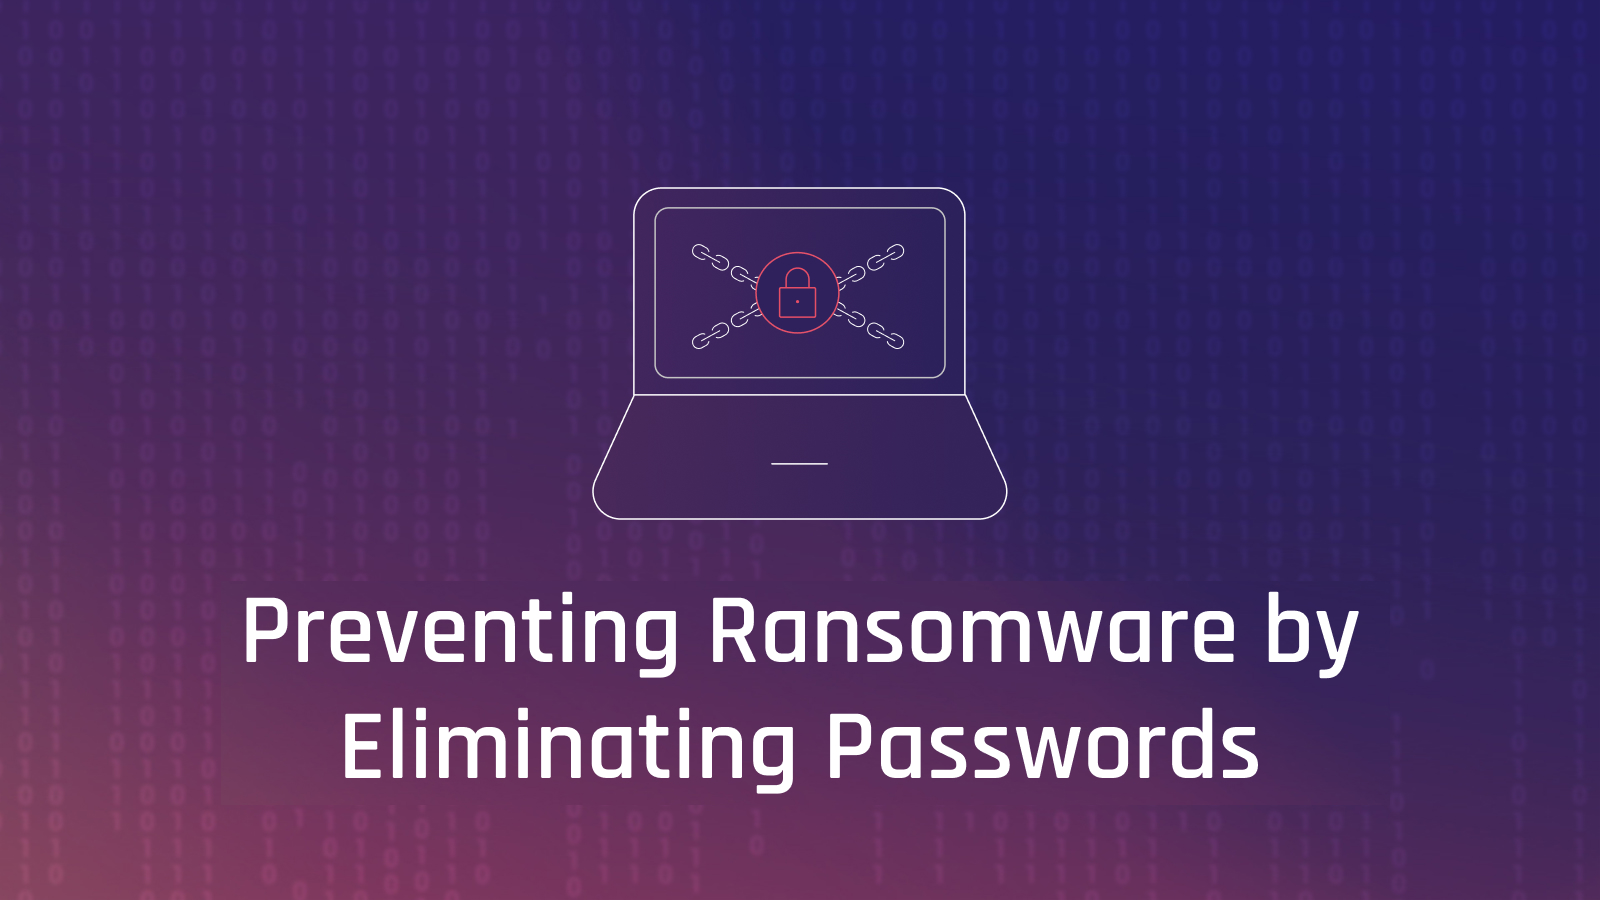 How to prevent ransomware